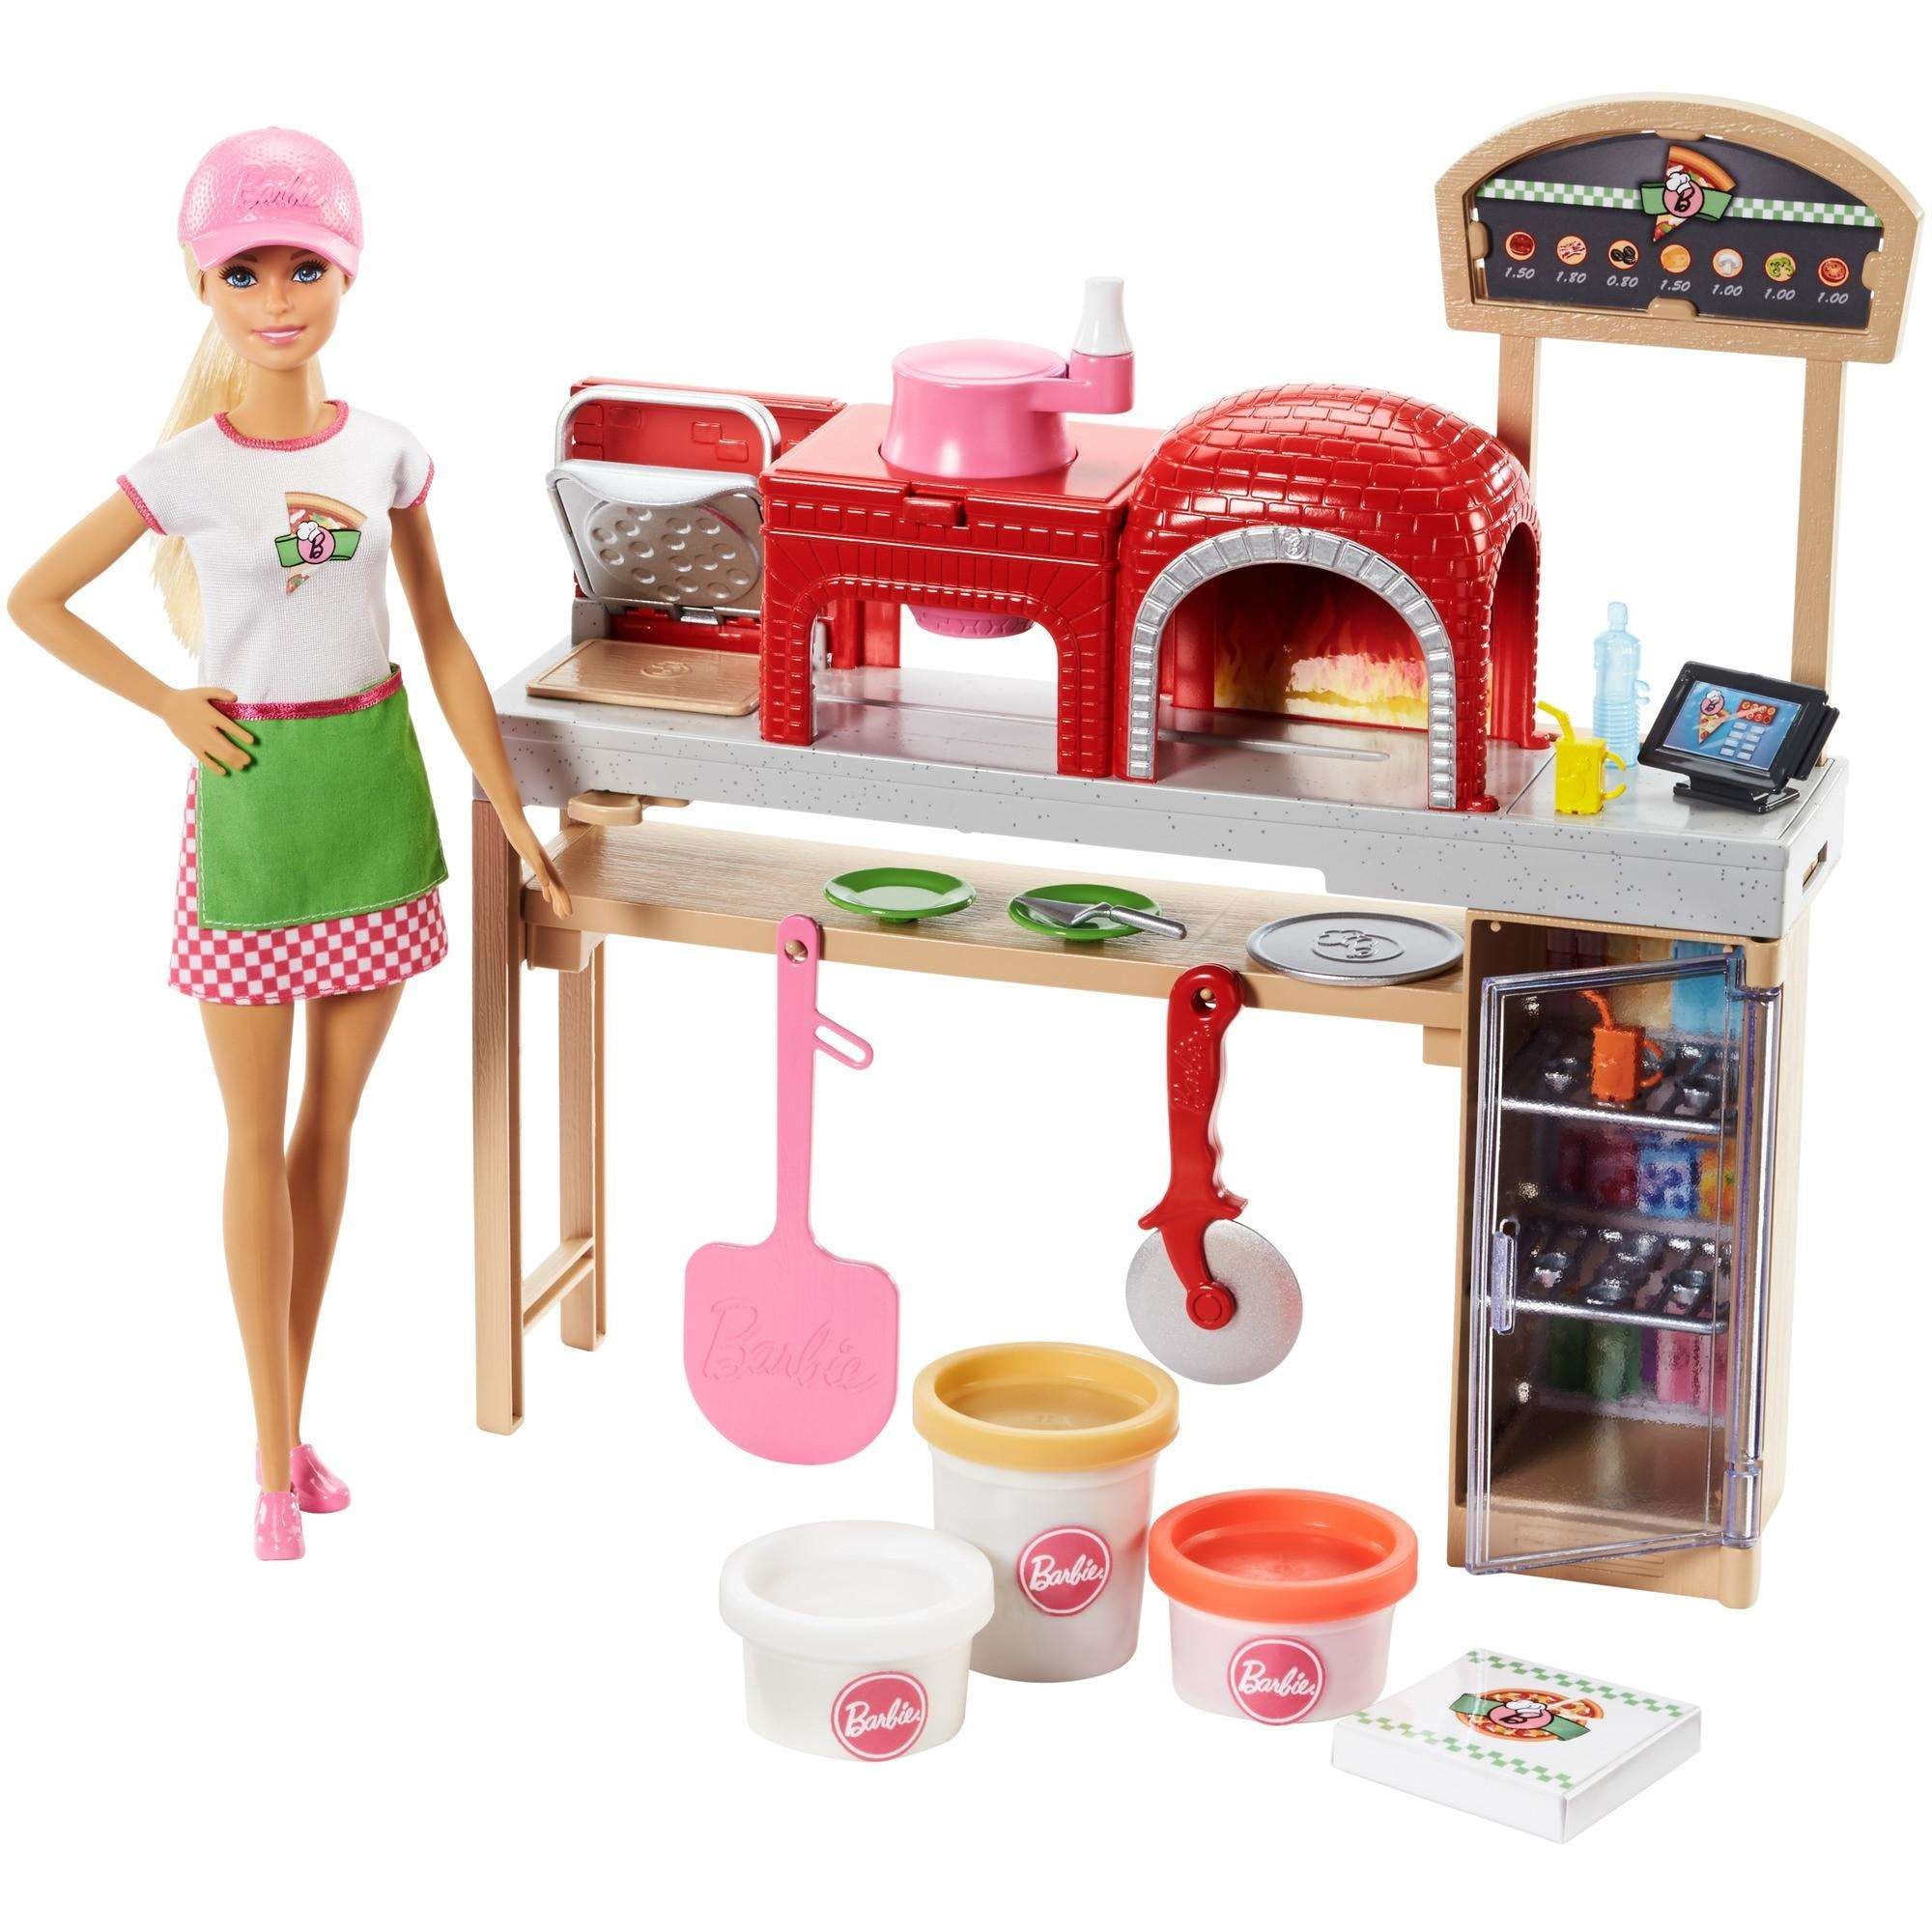  Barbie  Cooking  Baking Pizza Making Chef Doll Play Set  